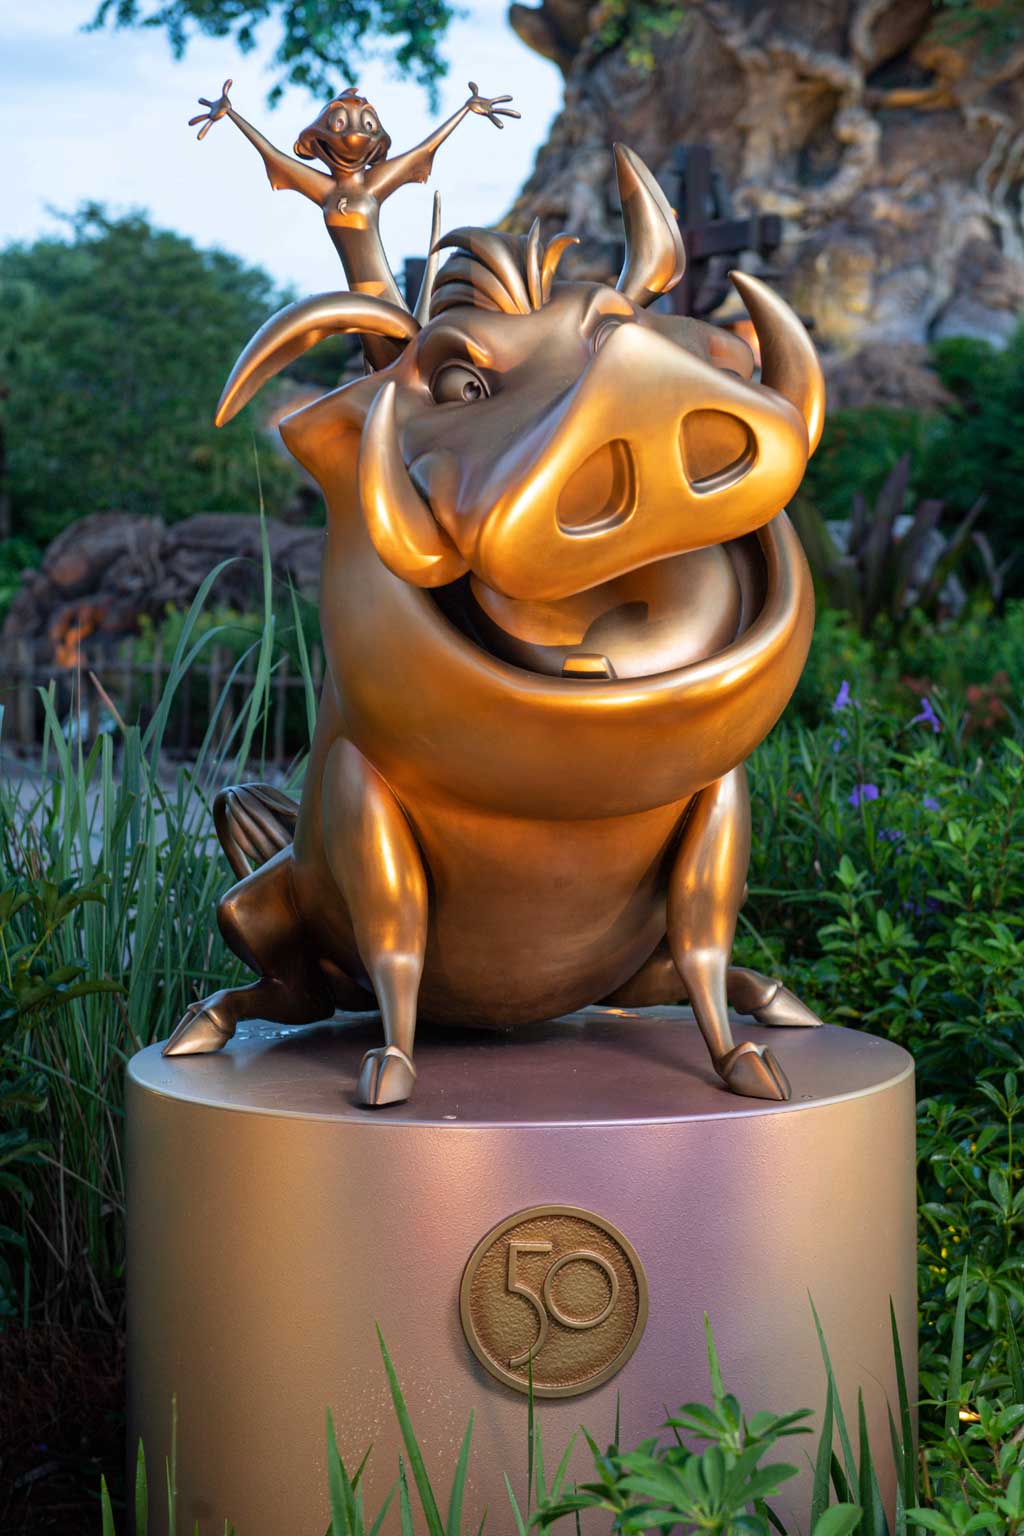 Timon and Pumba at Disney’s Animal Kingdom Theme Park are two of the “Disney Fab 50 Character Collection” appearing in all four Walt Disney World Resort theme parks in Lake Buena Vista, Fla., as part of “The World’s Most Magical Celebration,” beginning Oct. 1, 2021, in honor of the resort’s 50th anniversary. (David Roark, photographer)